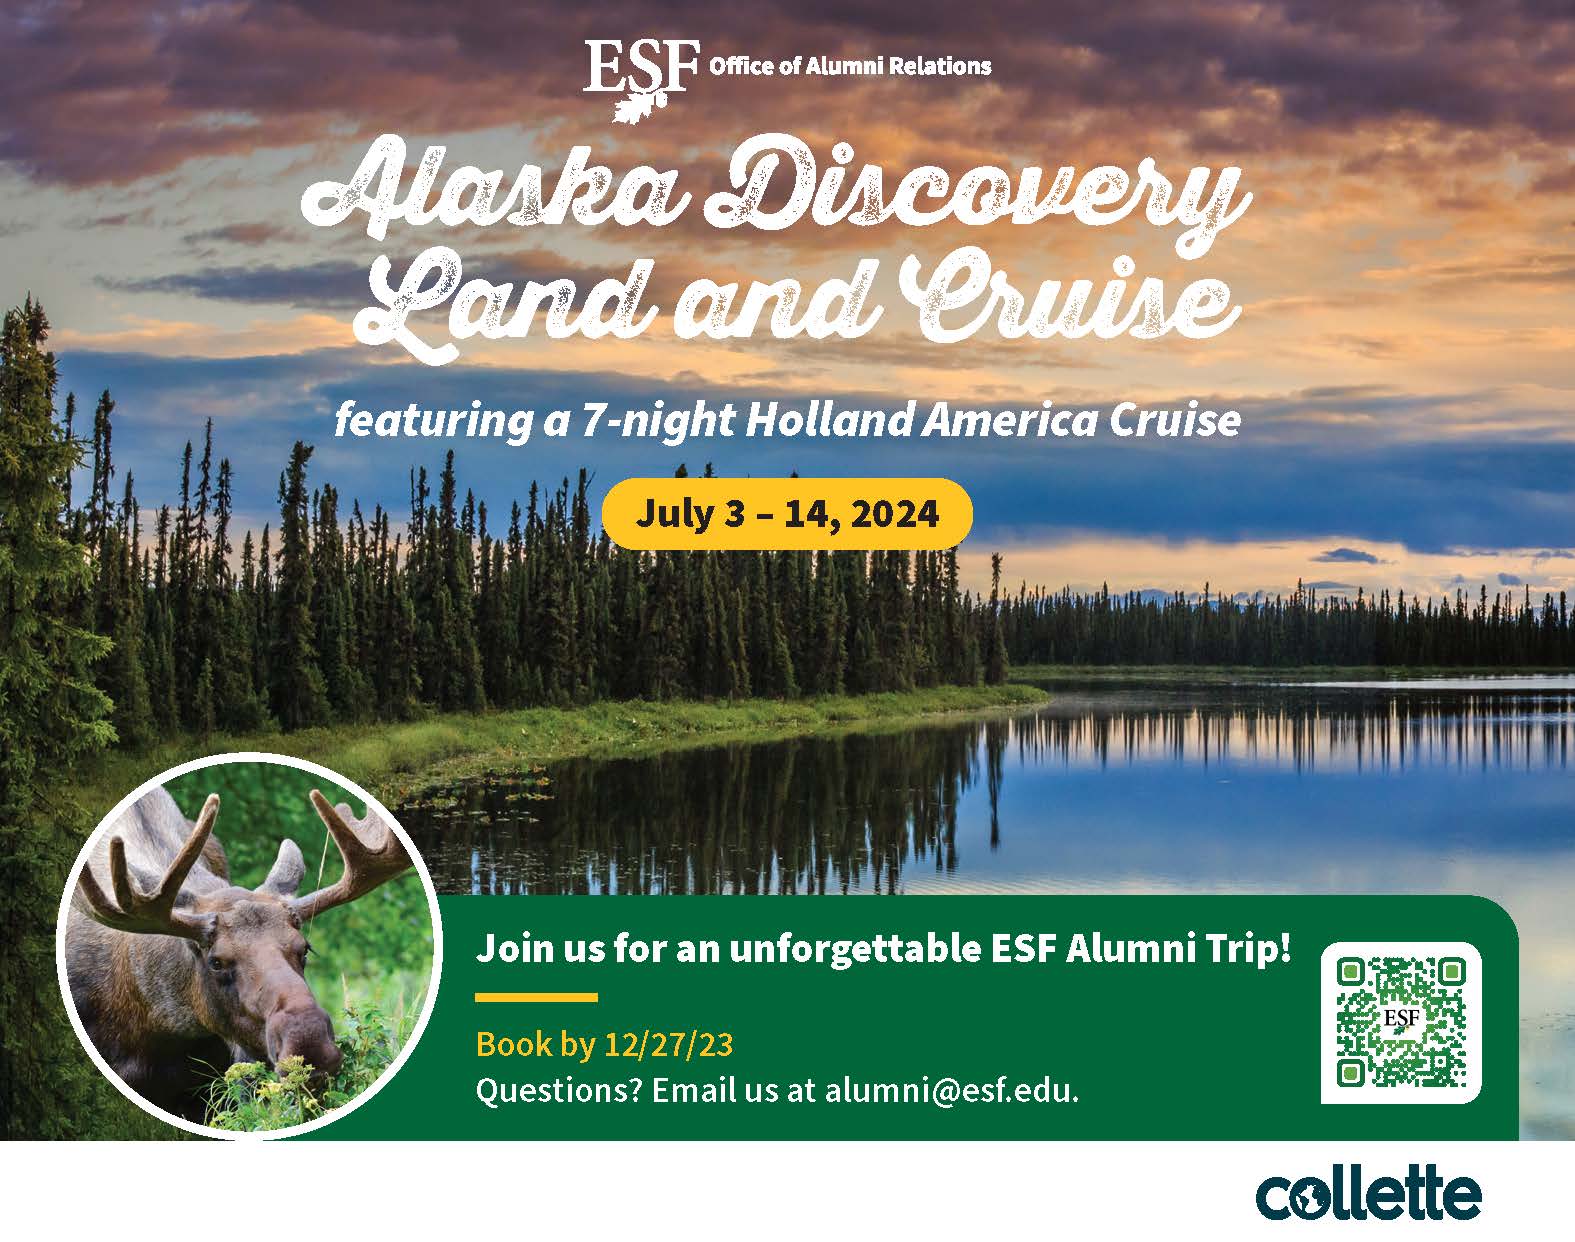 Office of Alumni Relations Alaska Discovery Land and Cruise. July 3 -14, 2024